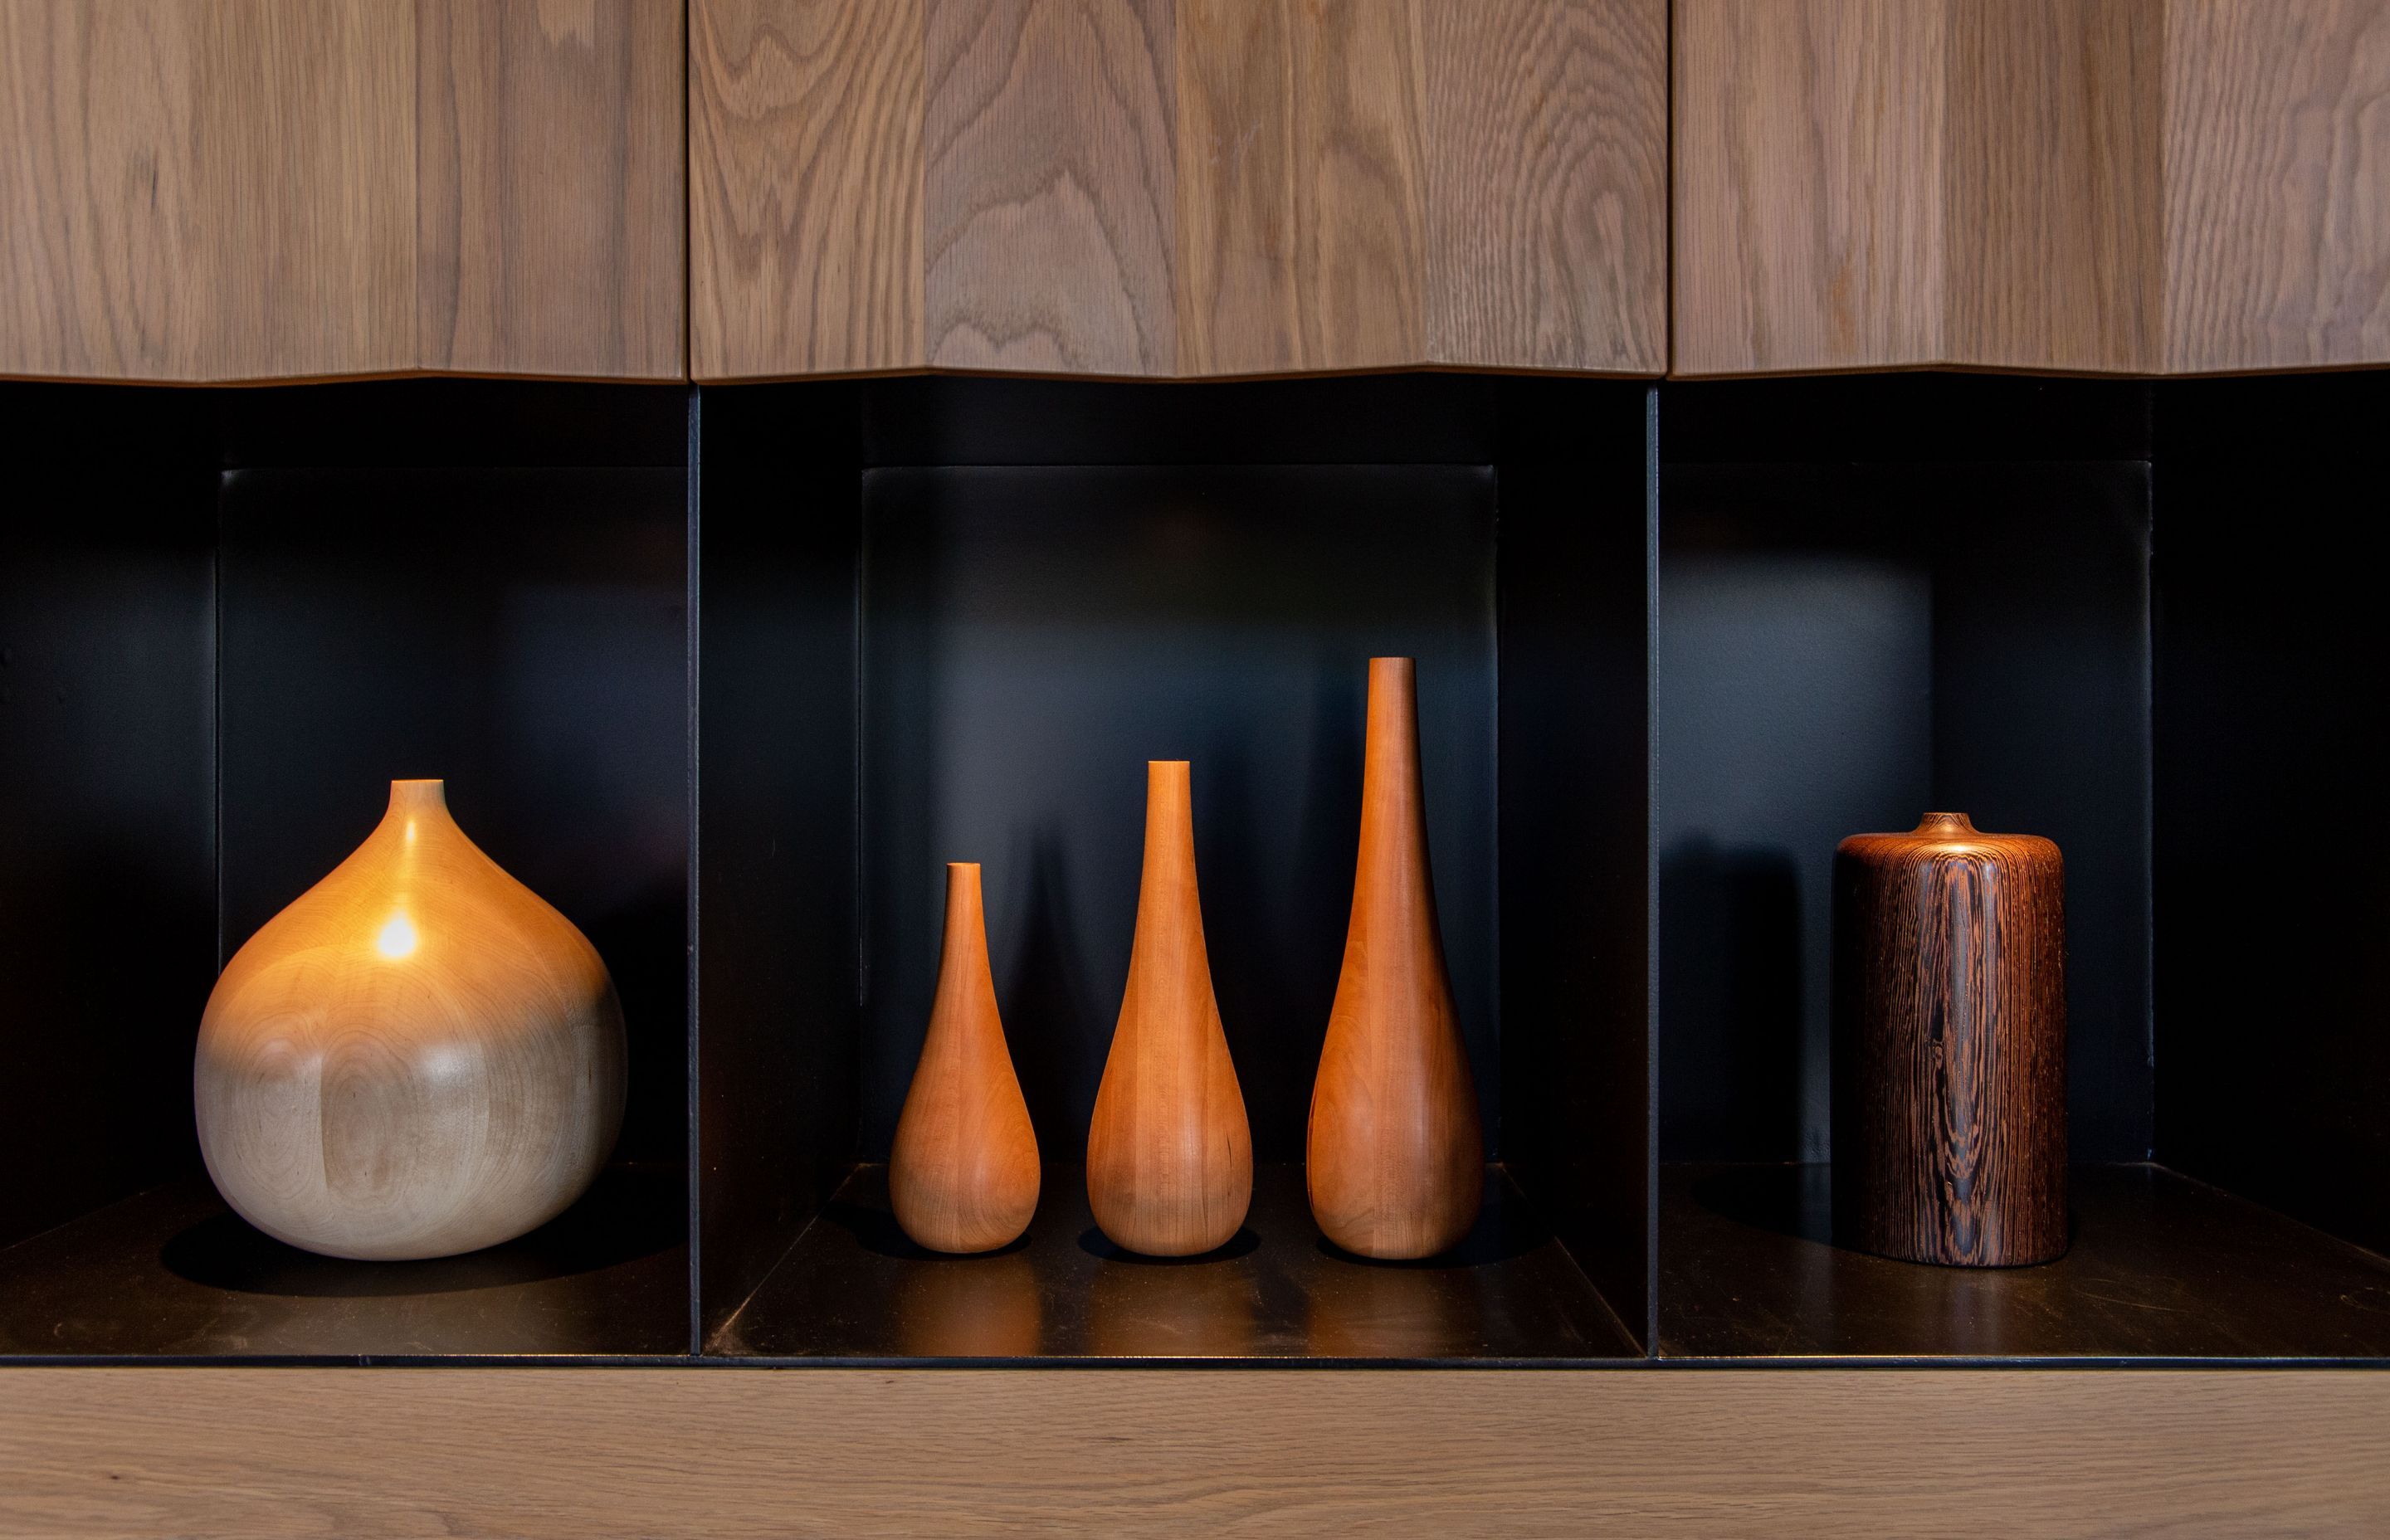  The turned wood samples are highlighted by recessed lights in the cabinet. Image Ross Keane